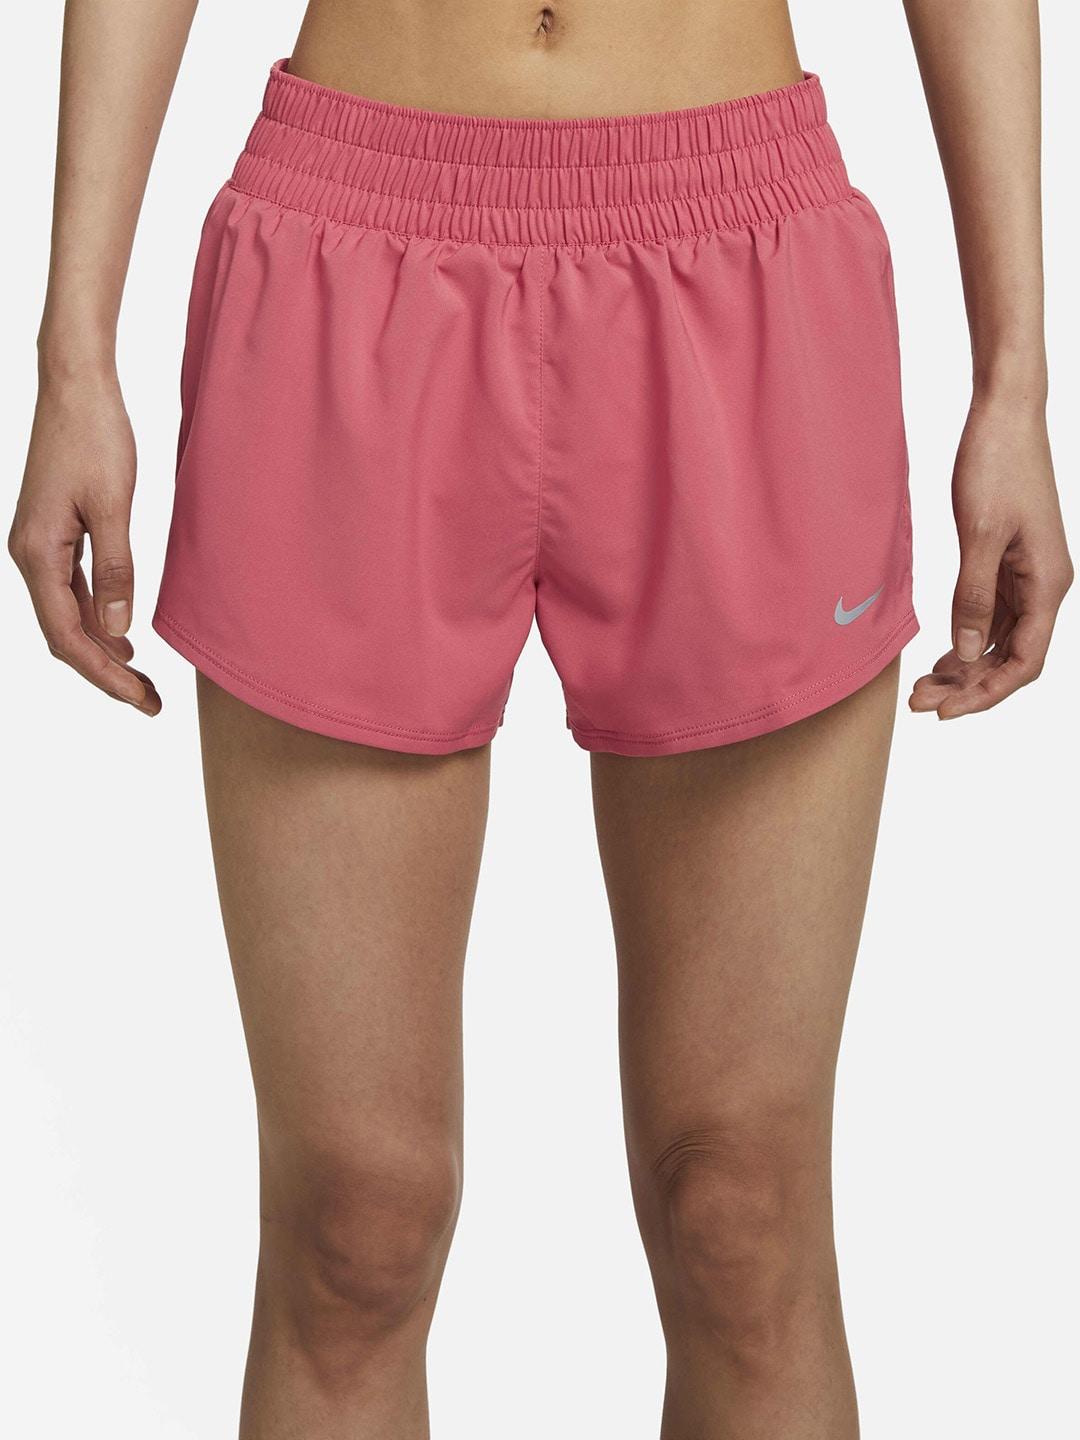 nike women dry-fit brief-lined shorts